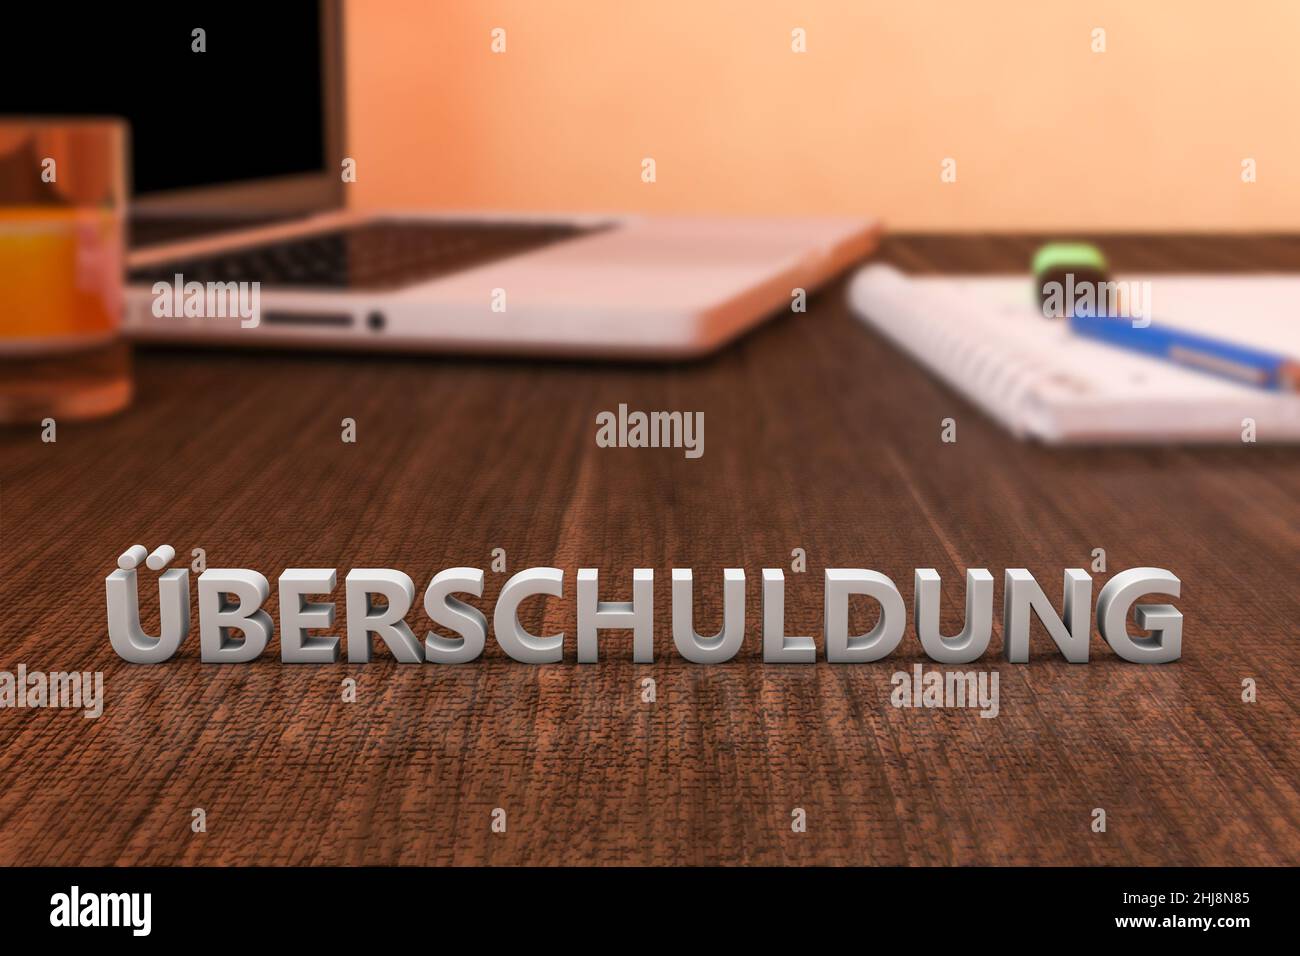 Ueberschuldung - german word for over indebtedness - letters on wooden desk with laptop computer and a notebook. 3d render illustration. Stock Photo